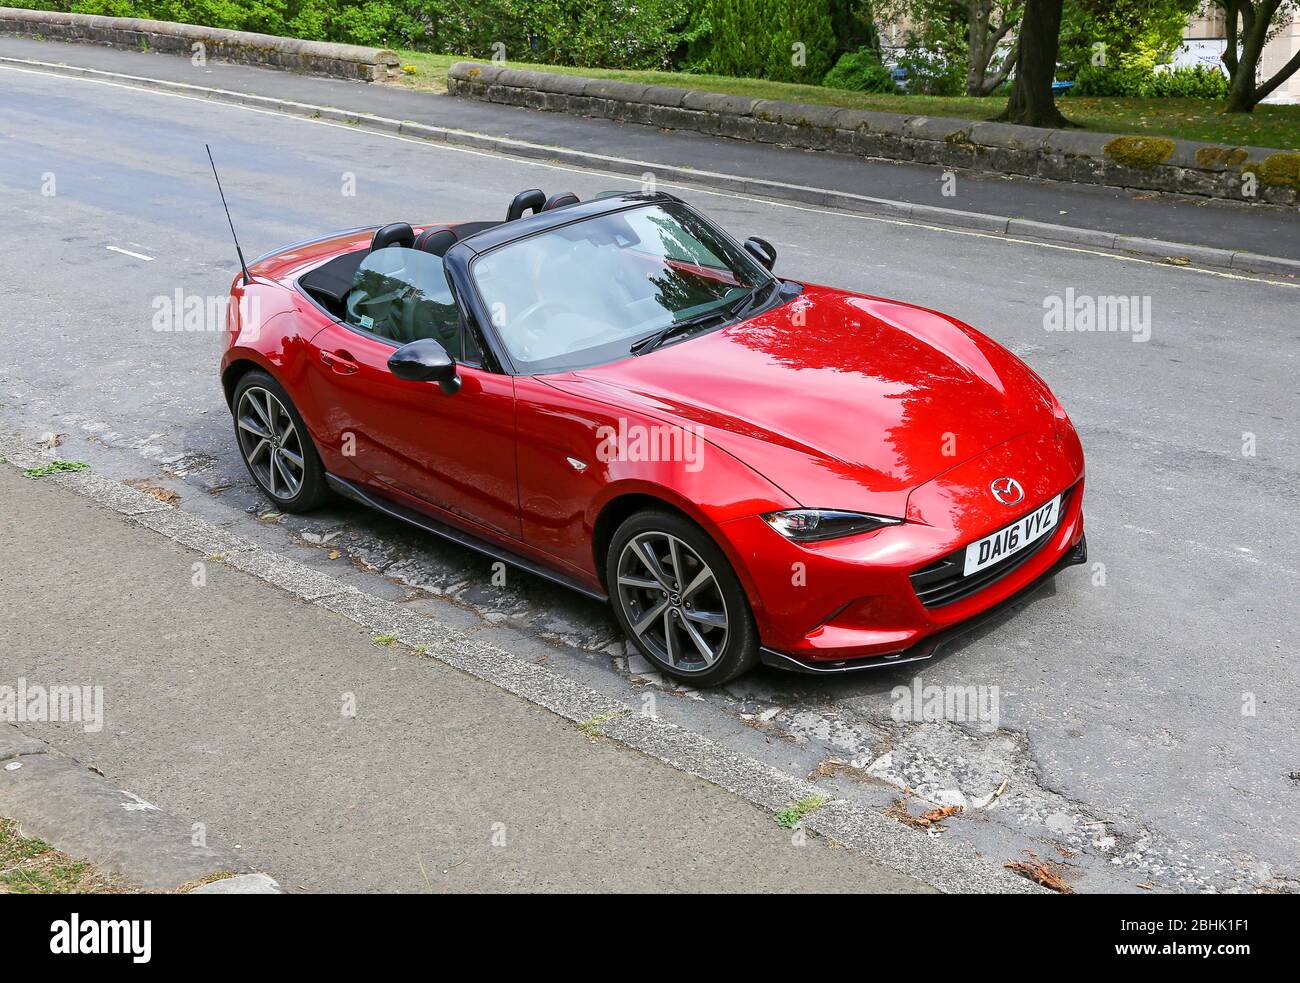 A red Mazda MX-5 soft top or convertible sports car, England, UK Stock Photo